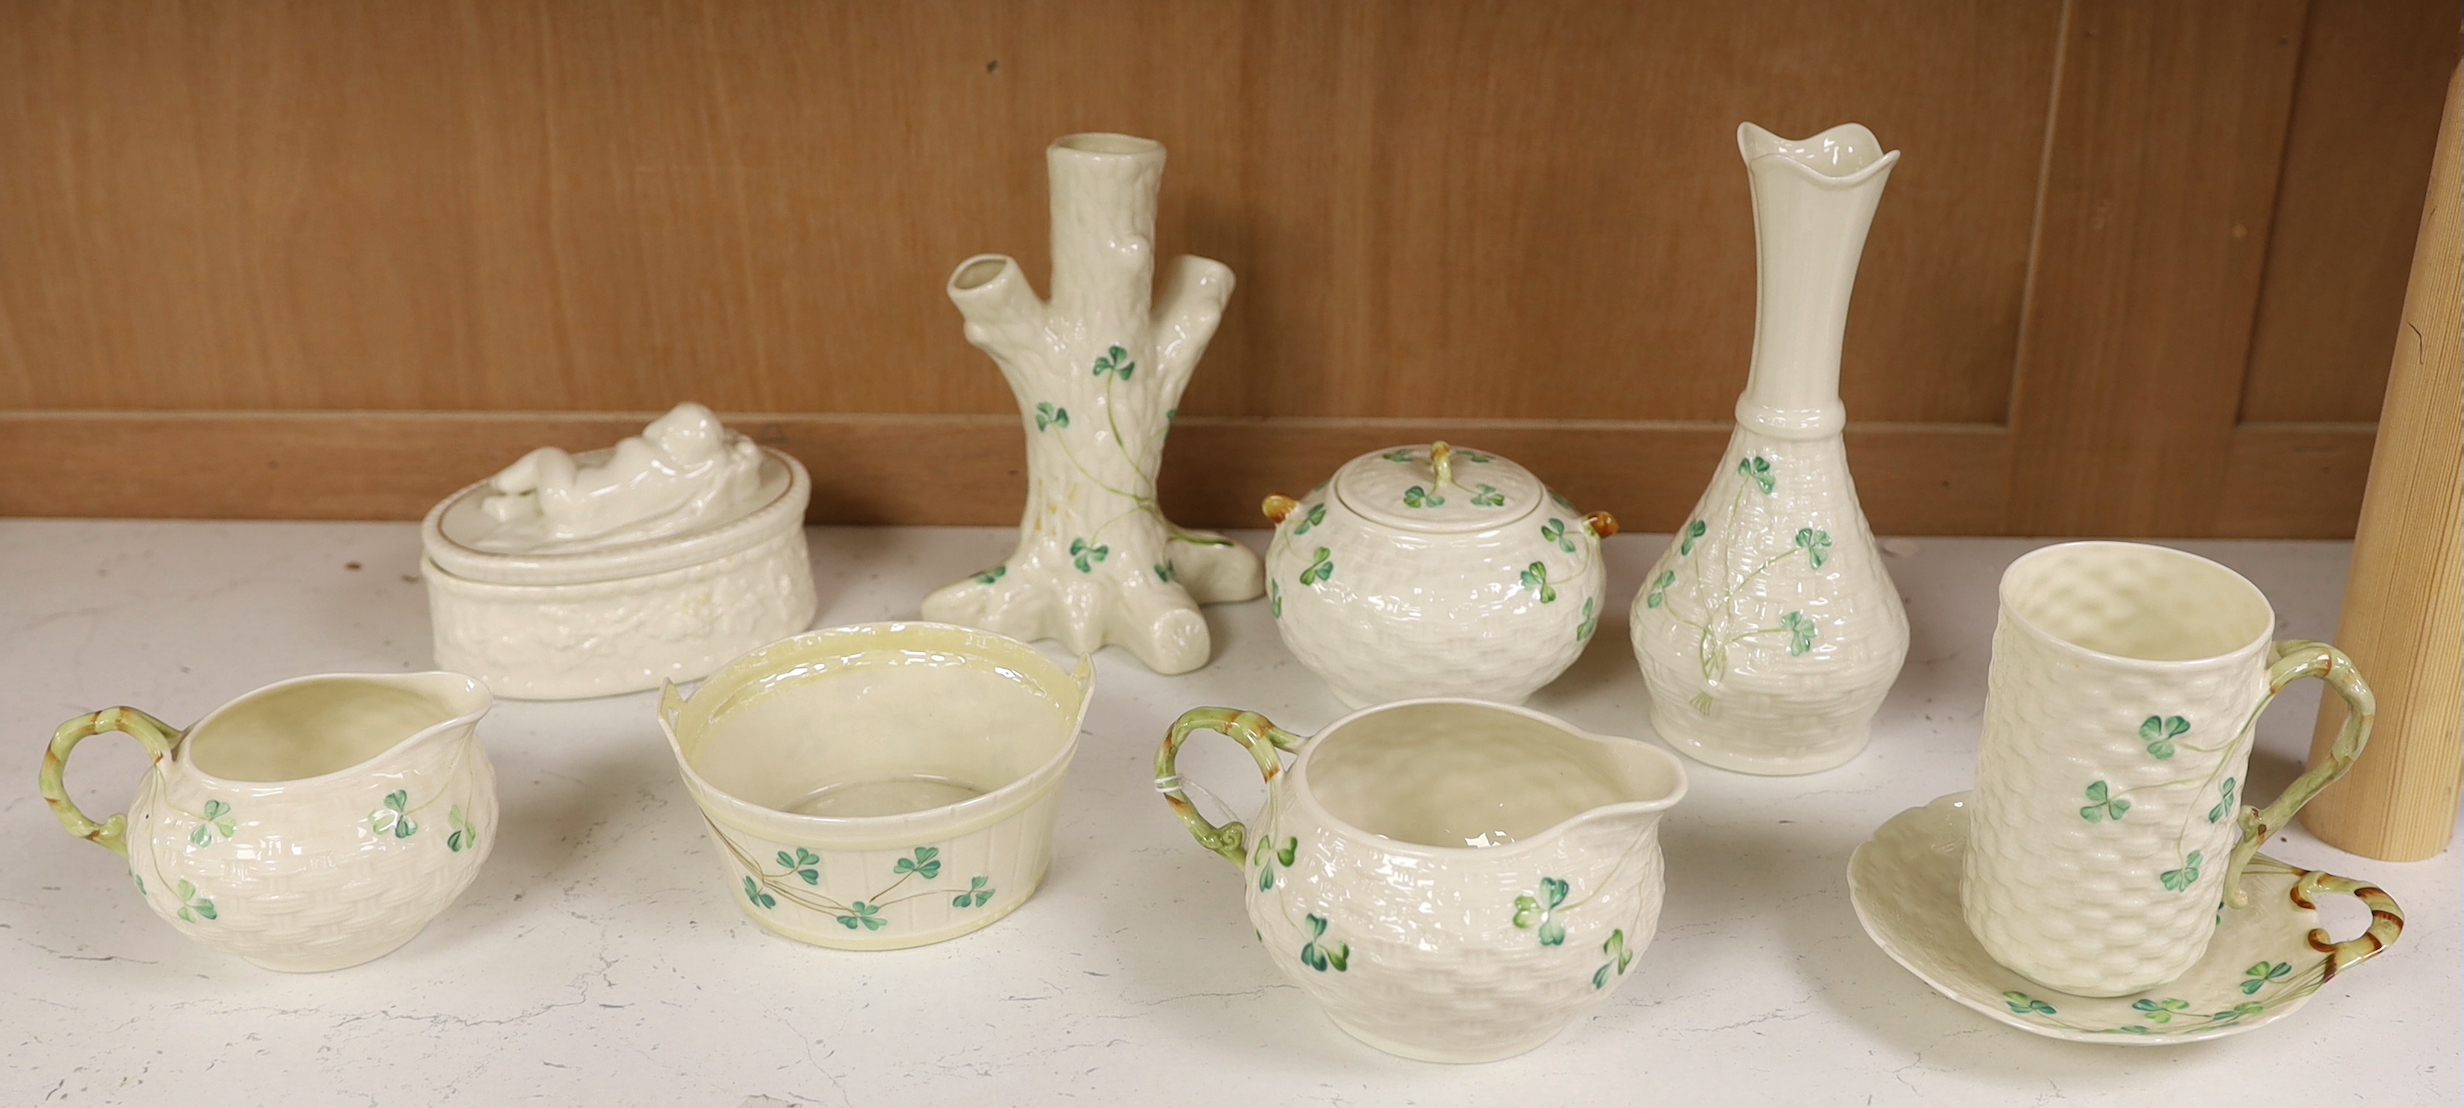 A quantity of Belleek ‘Clover’ pattern ceramics and a Belleek box and cover, tallest 18.5cm